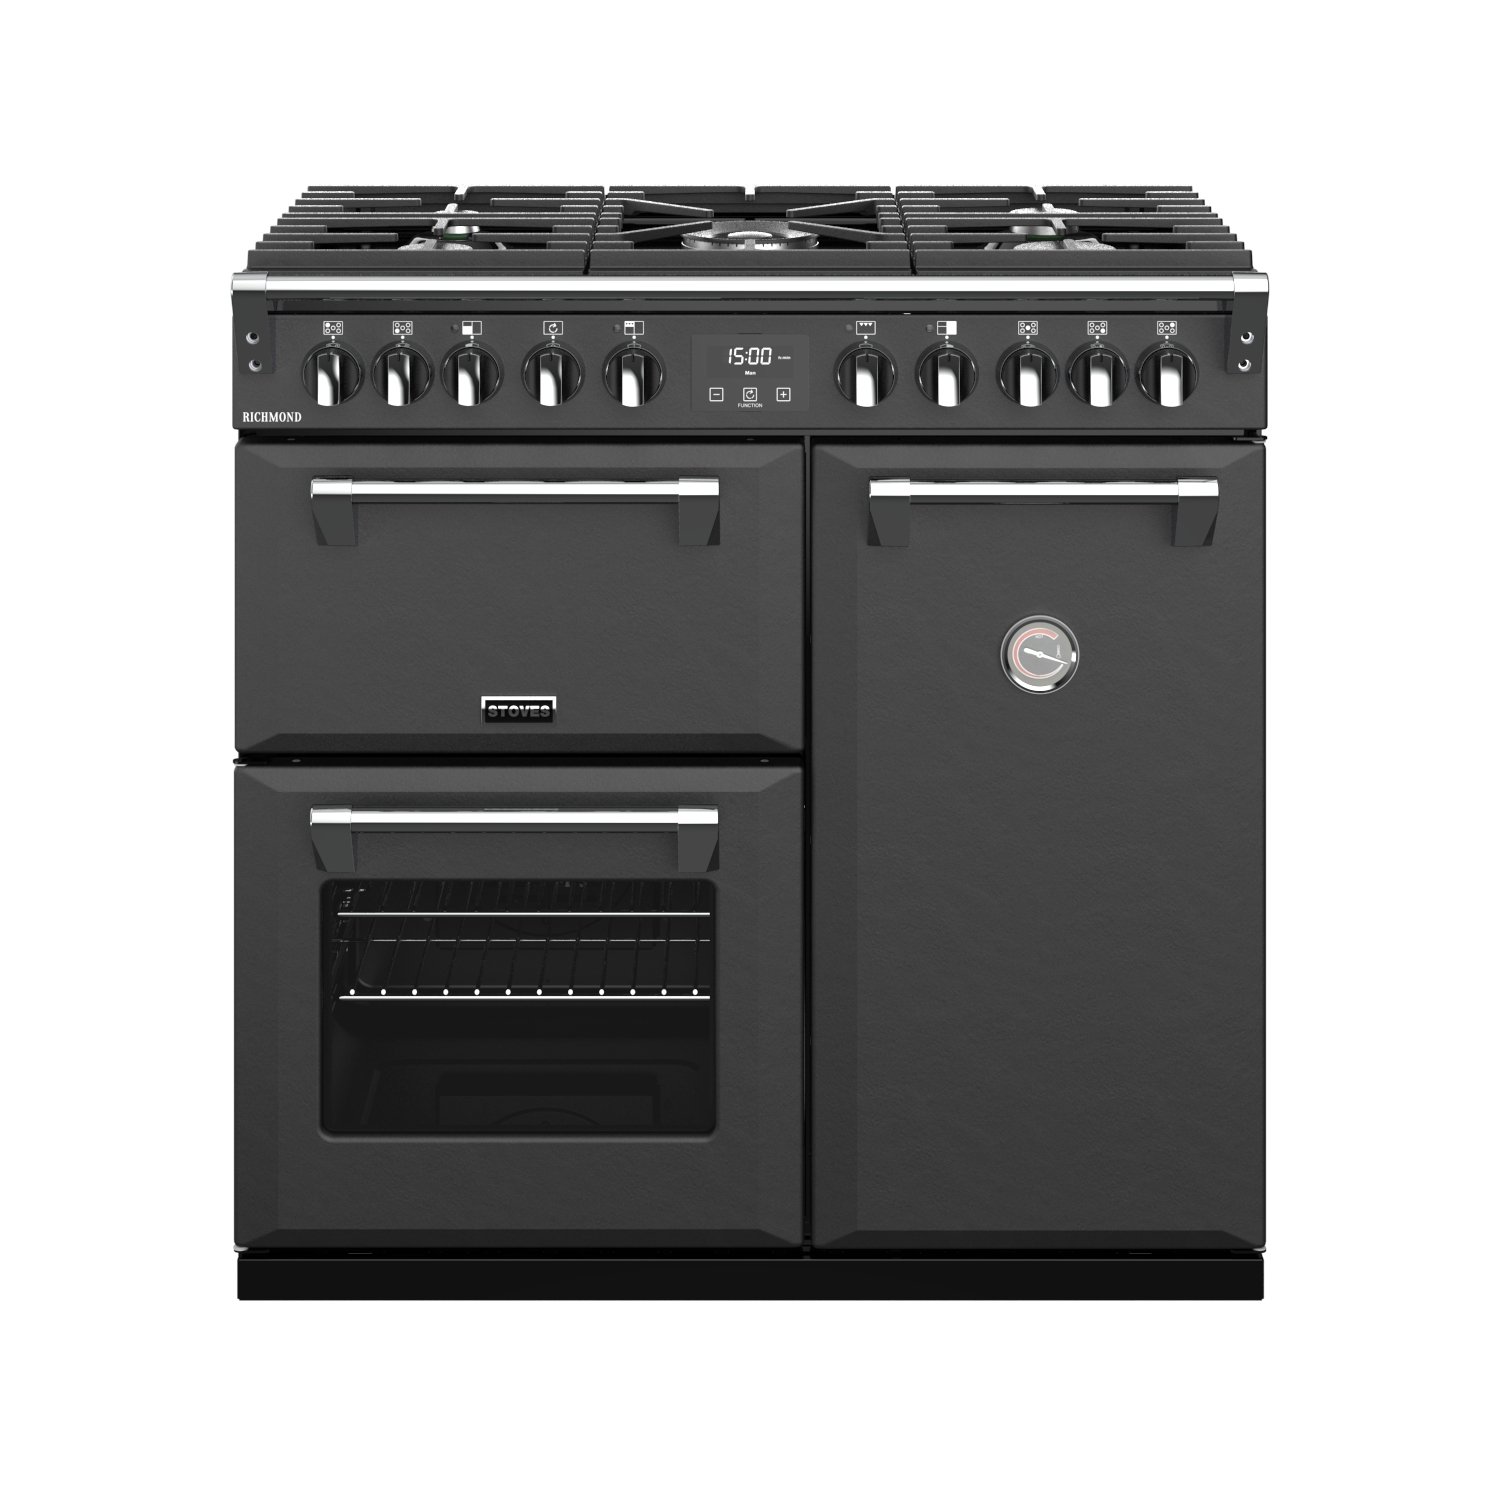 90cm Dual Fuel Range Cooker With A 5 Burner Gas Hob, Conventional Oven &amp; Grill, Multifunction Main Oven And Tall Fanned Oven